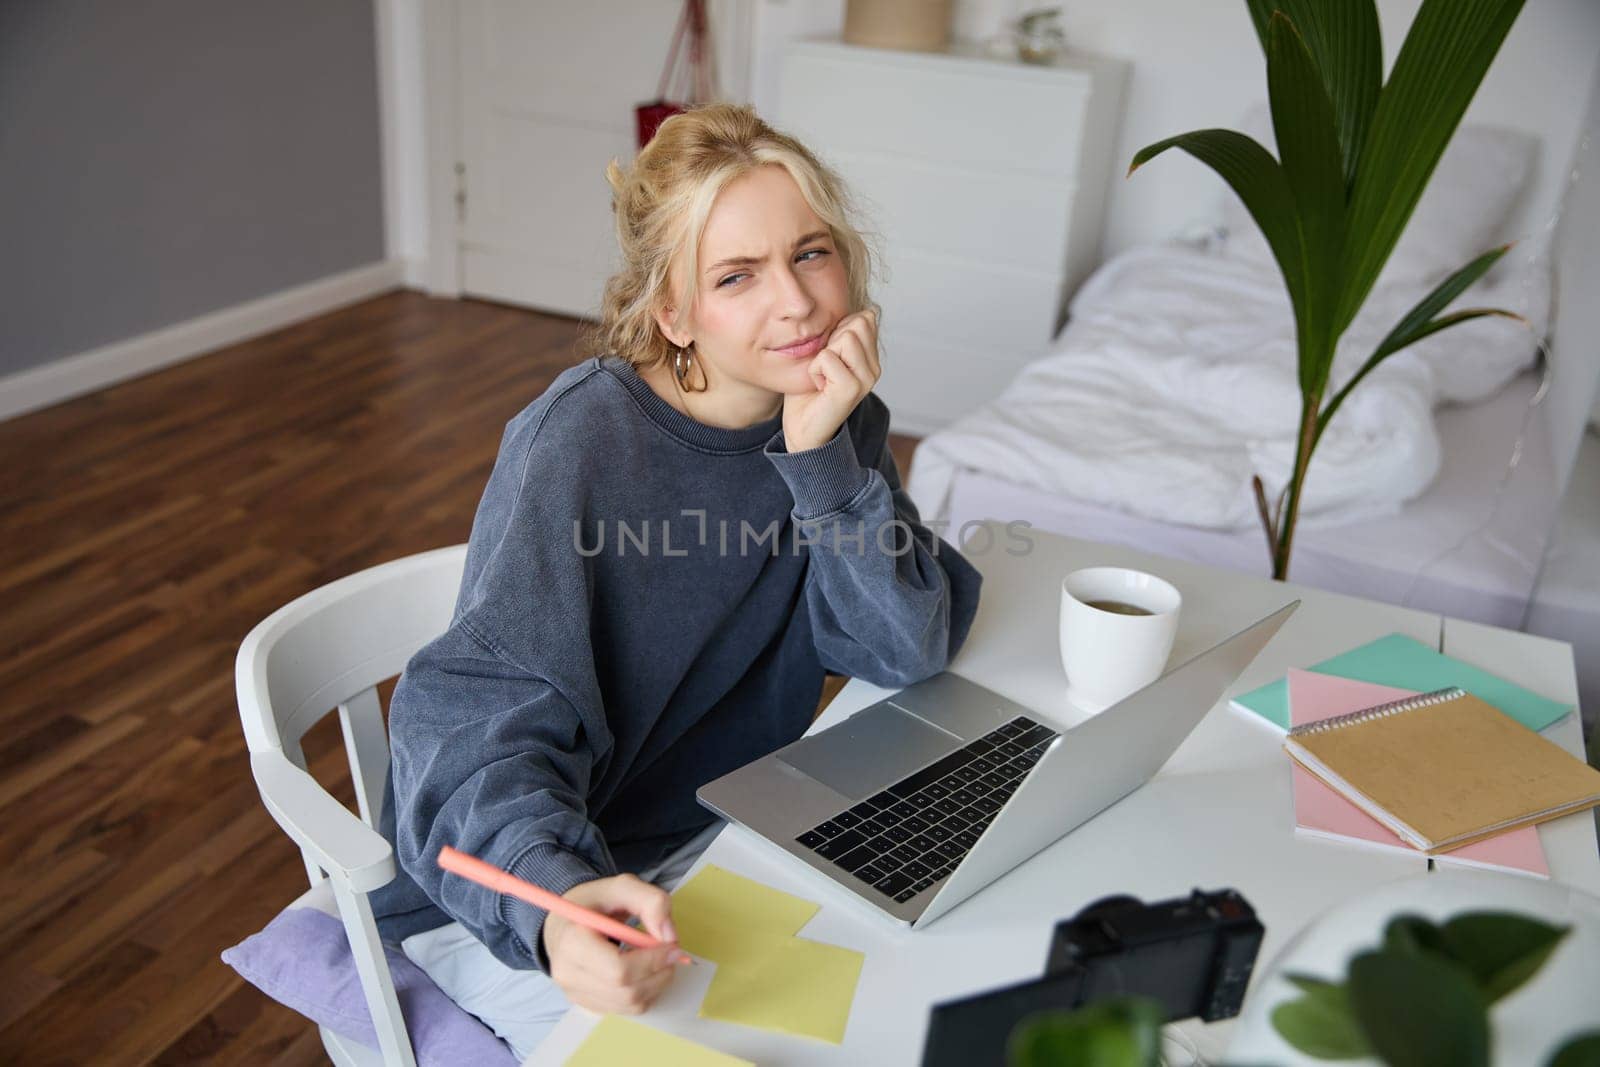 Portrait of young thoughtful girl, studying, making notes, writing down something in notebook, doing homework in her room, sitting in front of laptop, frowning while thinking.